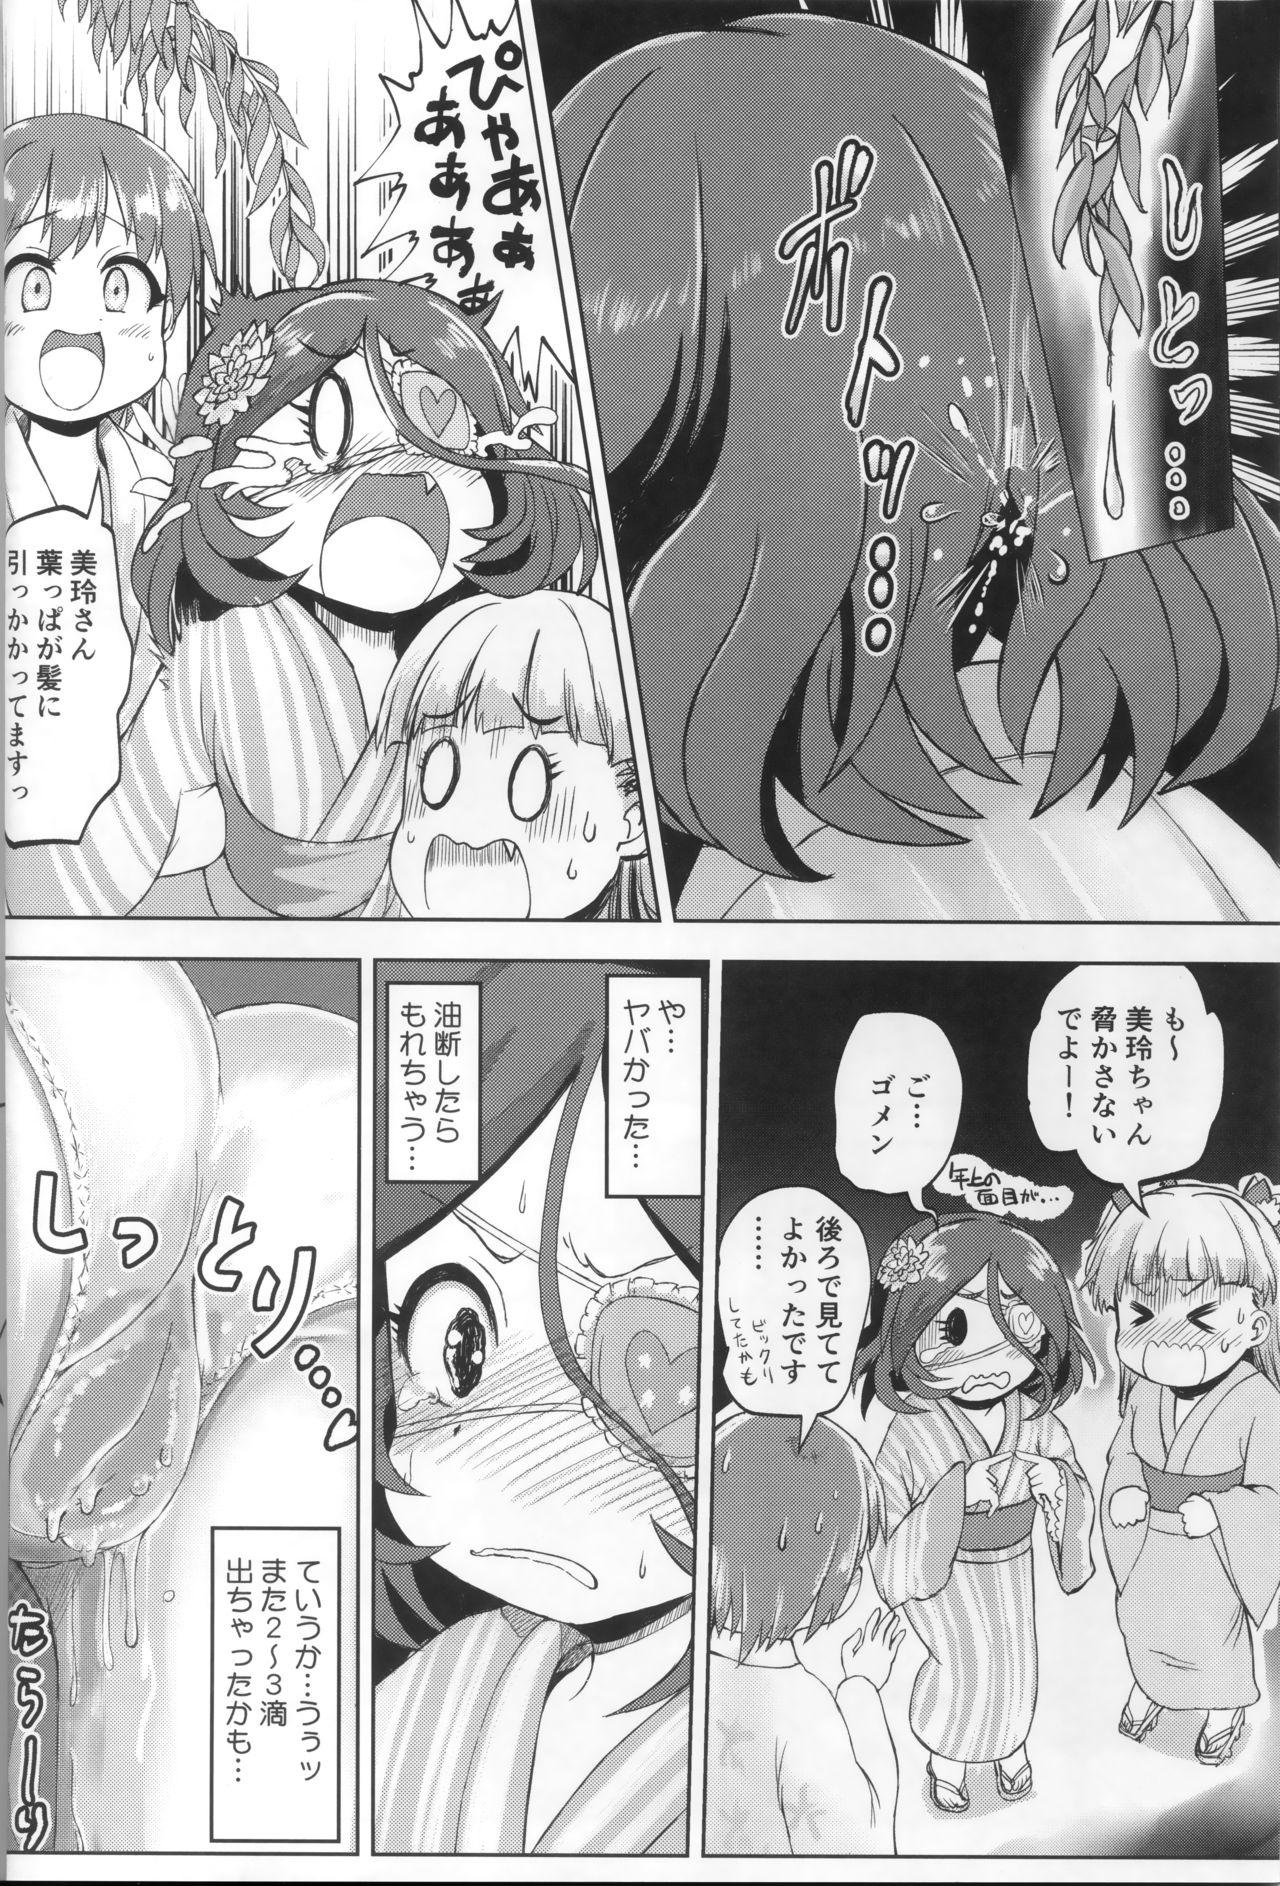 Star Mire More！ - The idolmaster Romantic - Page 7